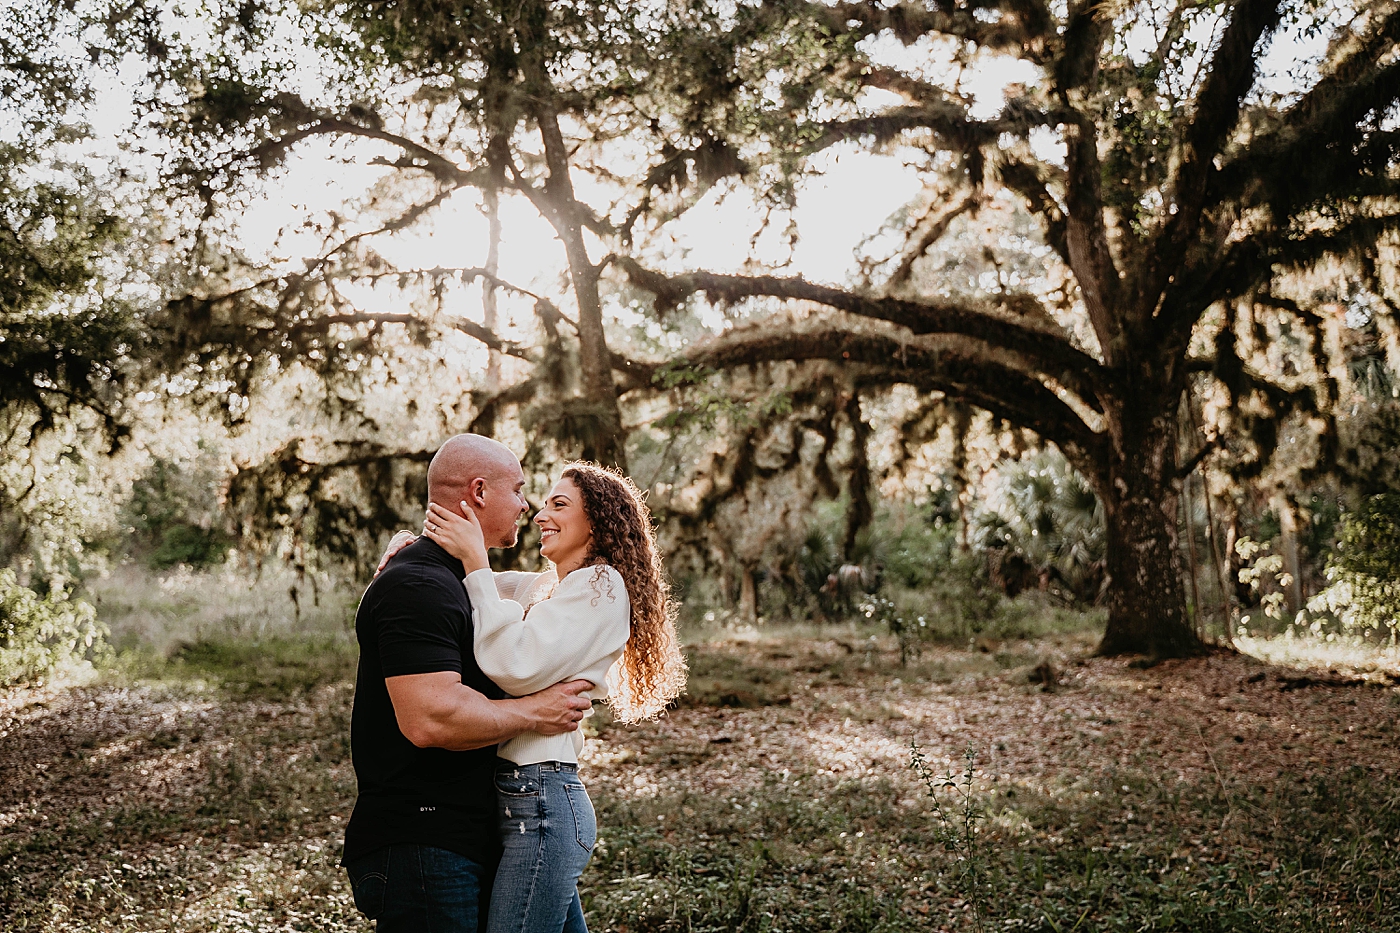 Couple hold each other in with the sun beaming in through trees Romantic Riverbend Park Engagement Photography captured by South Florida Photographer Krystal Capone Photography